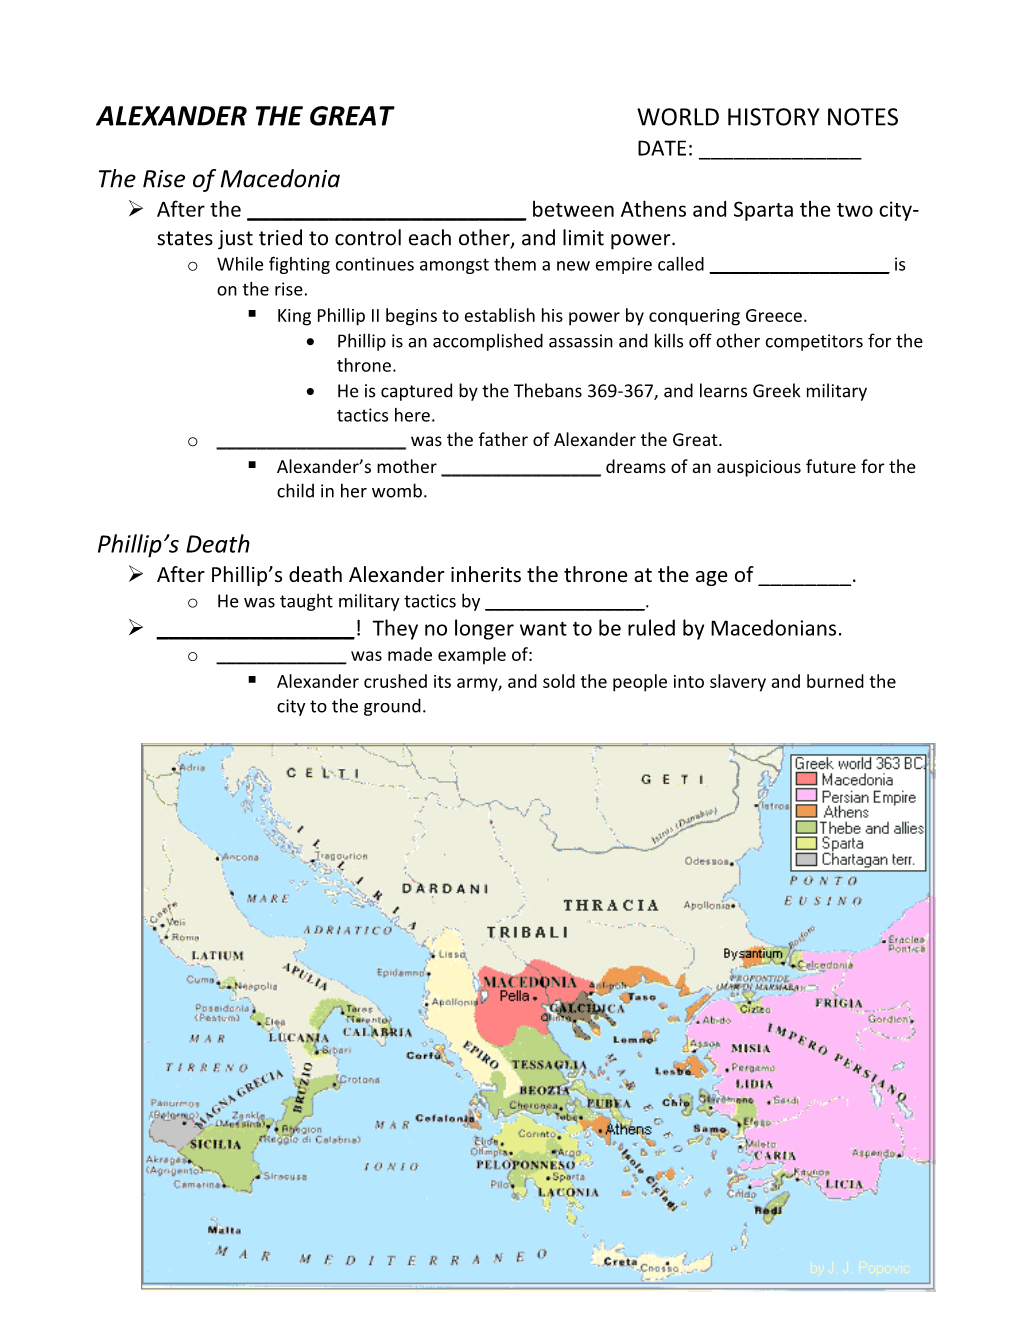 Alexander the Great World History Notes